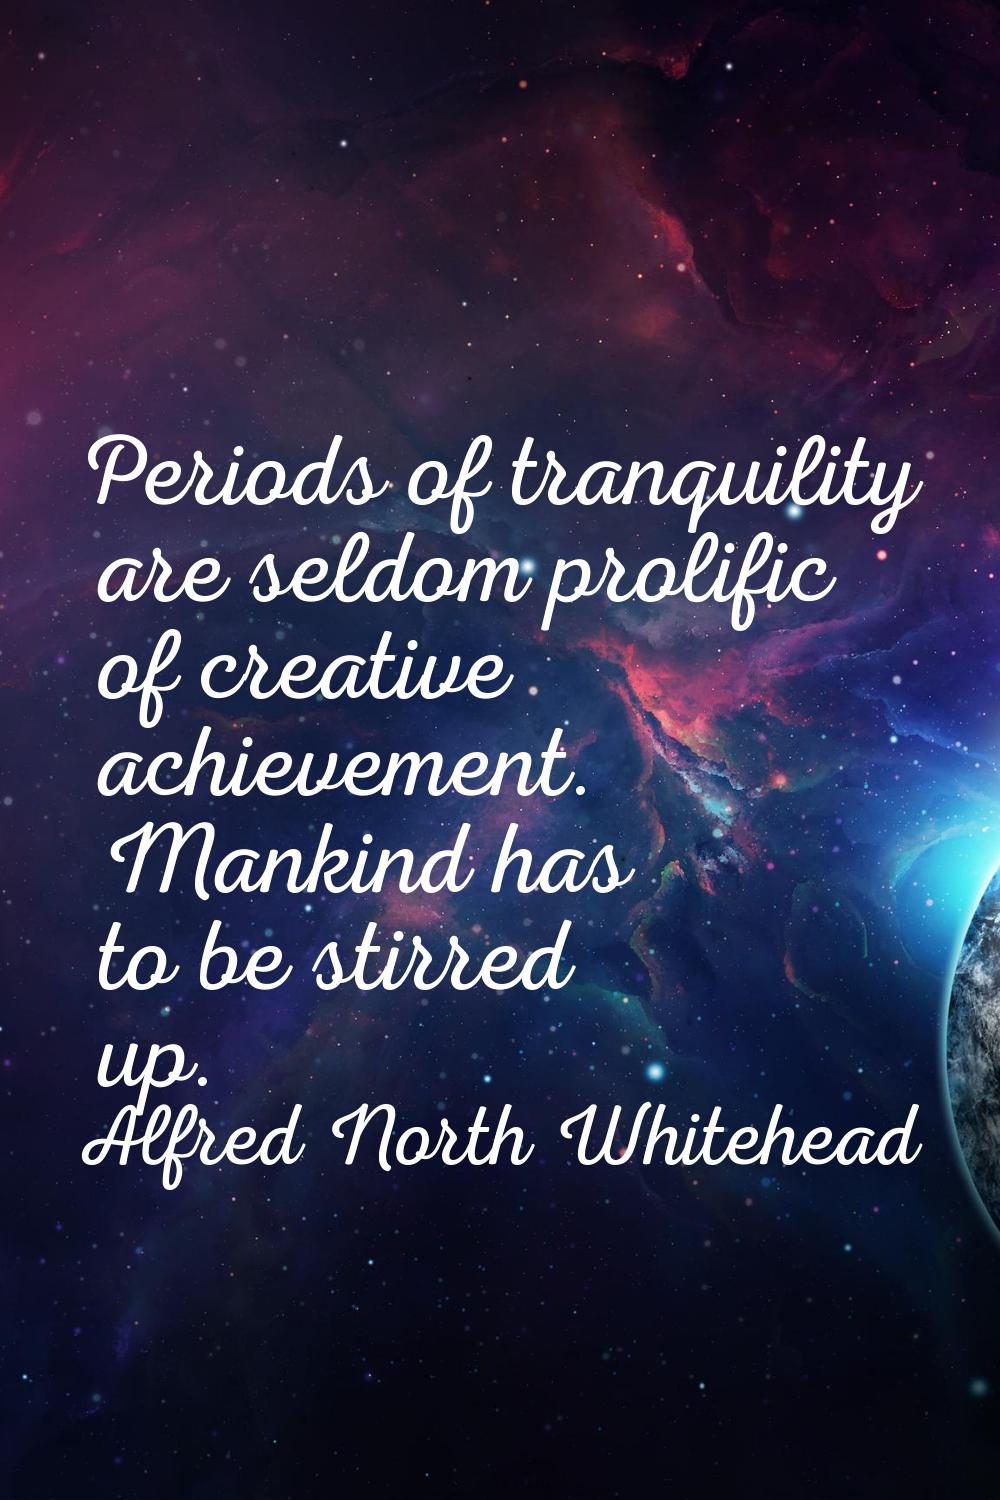 Periods of tranquility are seldom prolific of creative achievement. Mankind has to be stirred up.